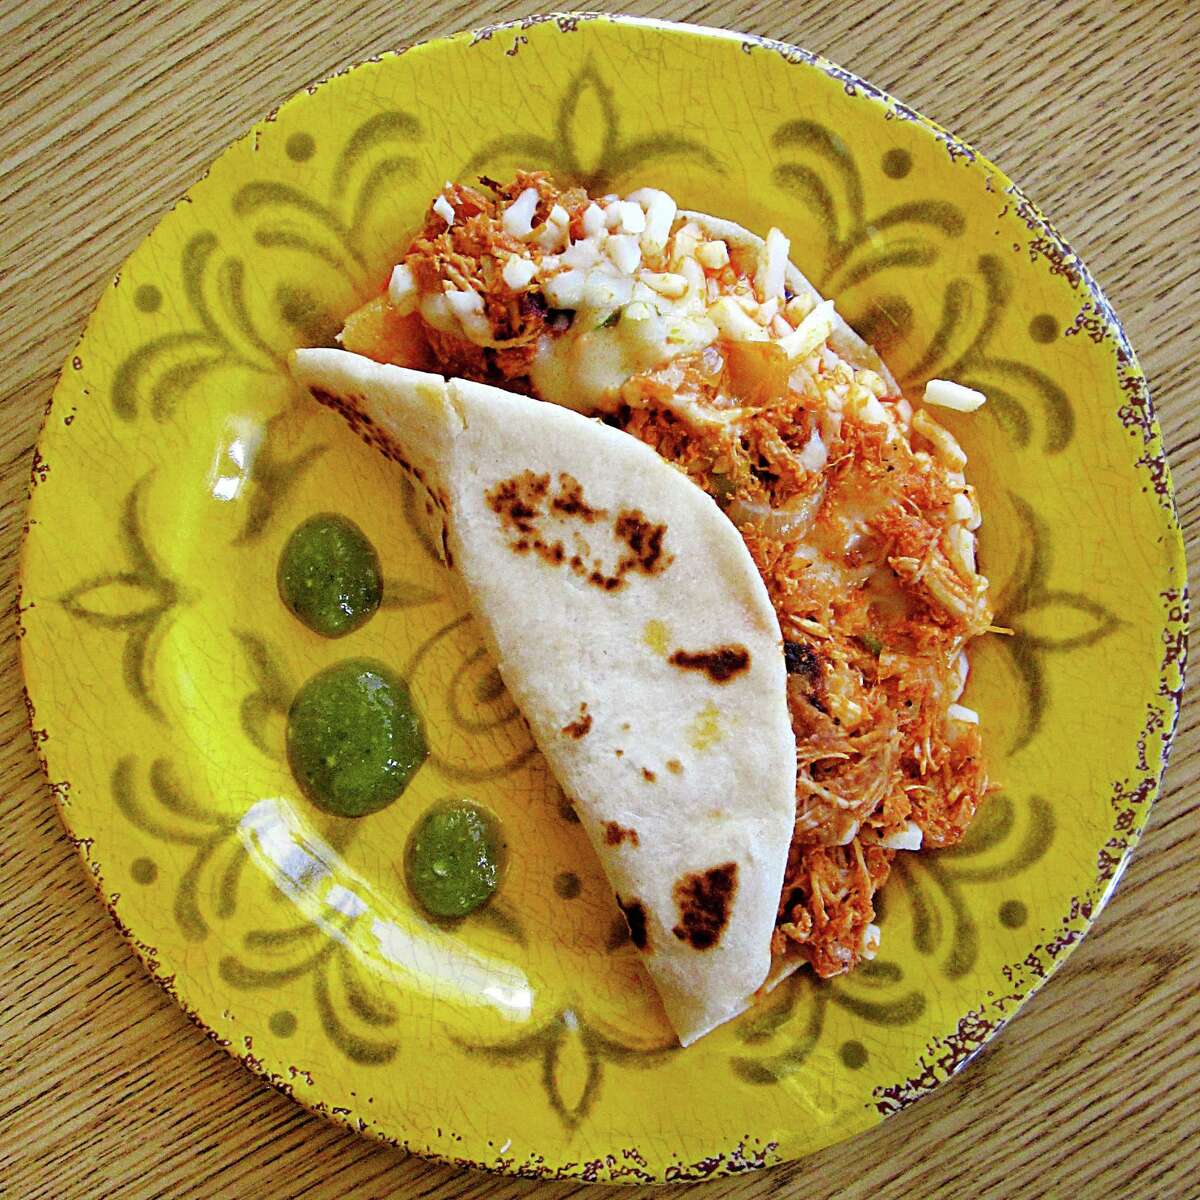 Chicken pirata taco with beans and queso blanco on a handmade flour tortilla from Santos Cafe #1.